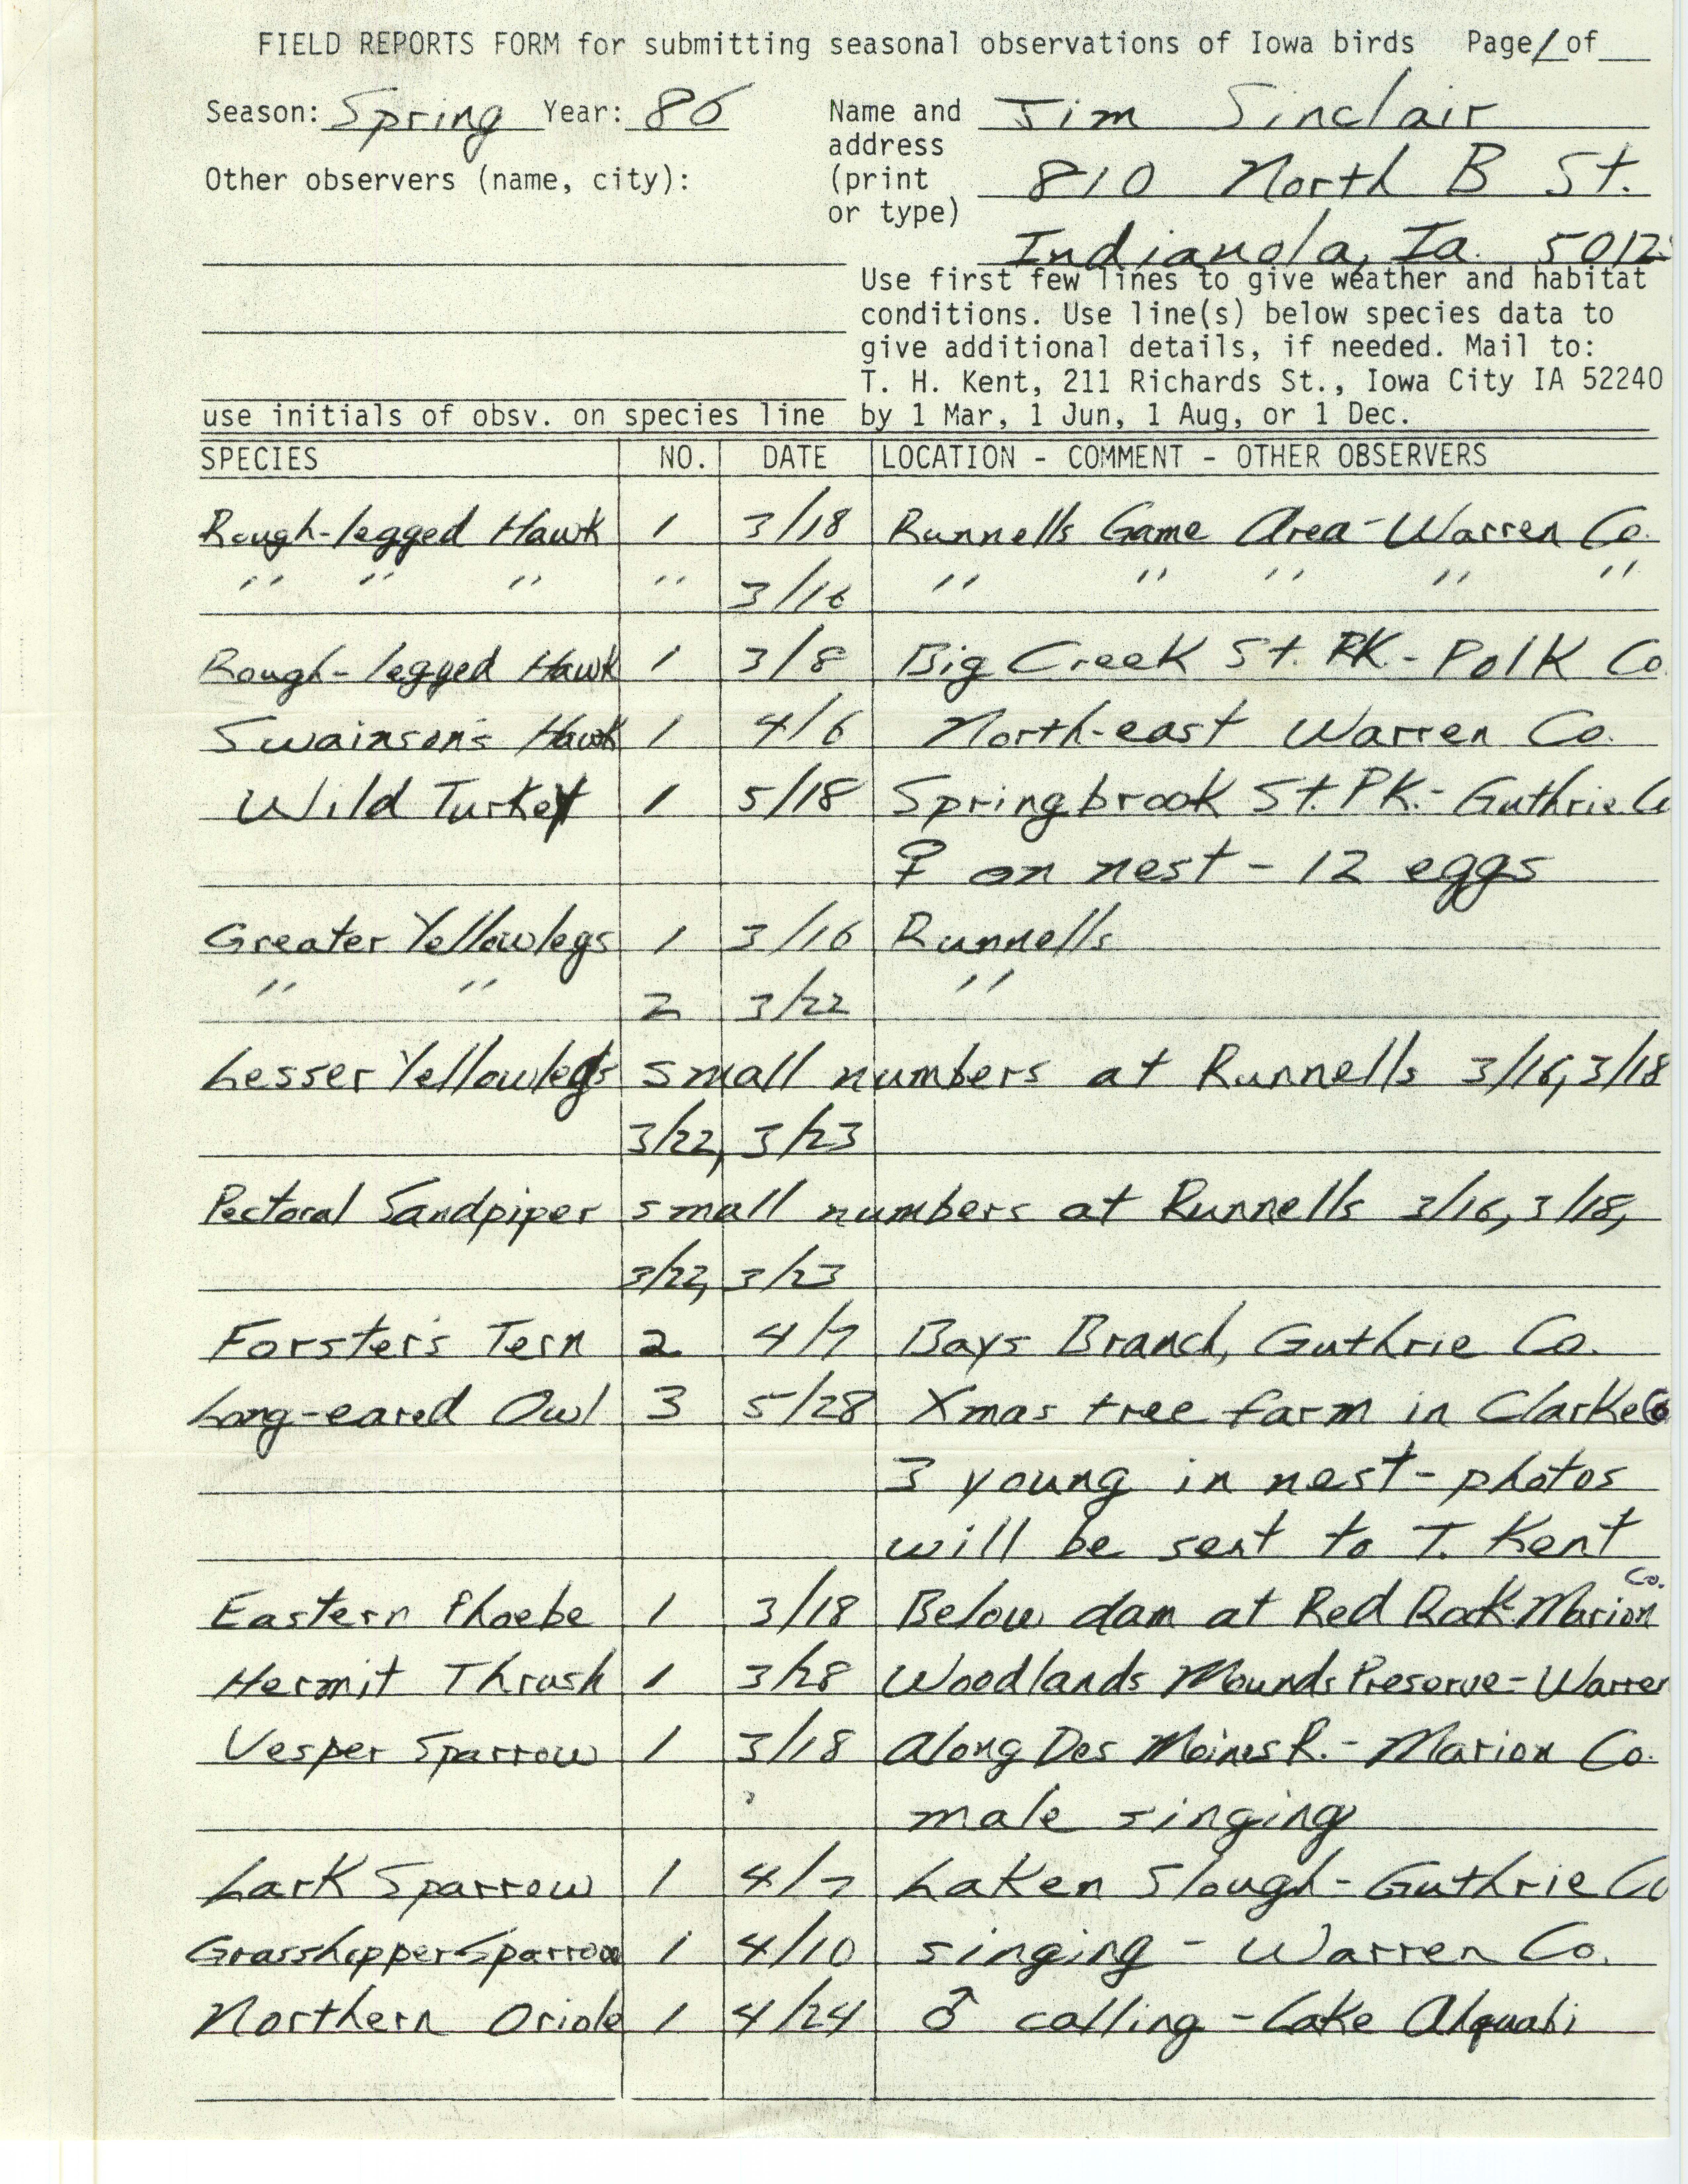 Field reports form for submitting seasonal observations of Iowa birds, Jim Sinclair, Spring 1986